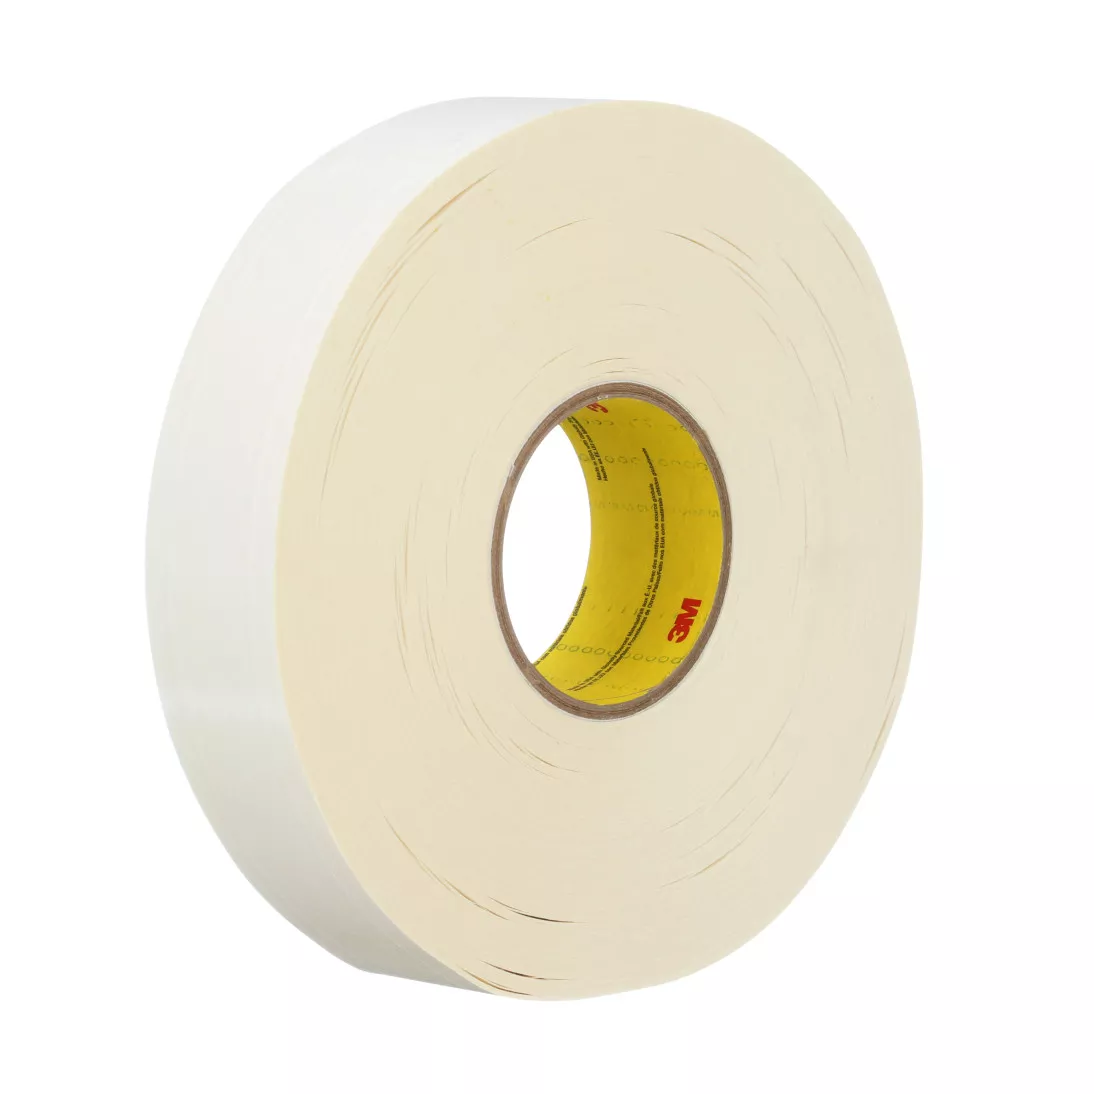 3M™ Repulpable Heavy Duty Double Coated Tape R3287, White, 36 mm x 55 m,
5 mil, 24 rolls per case